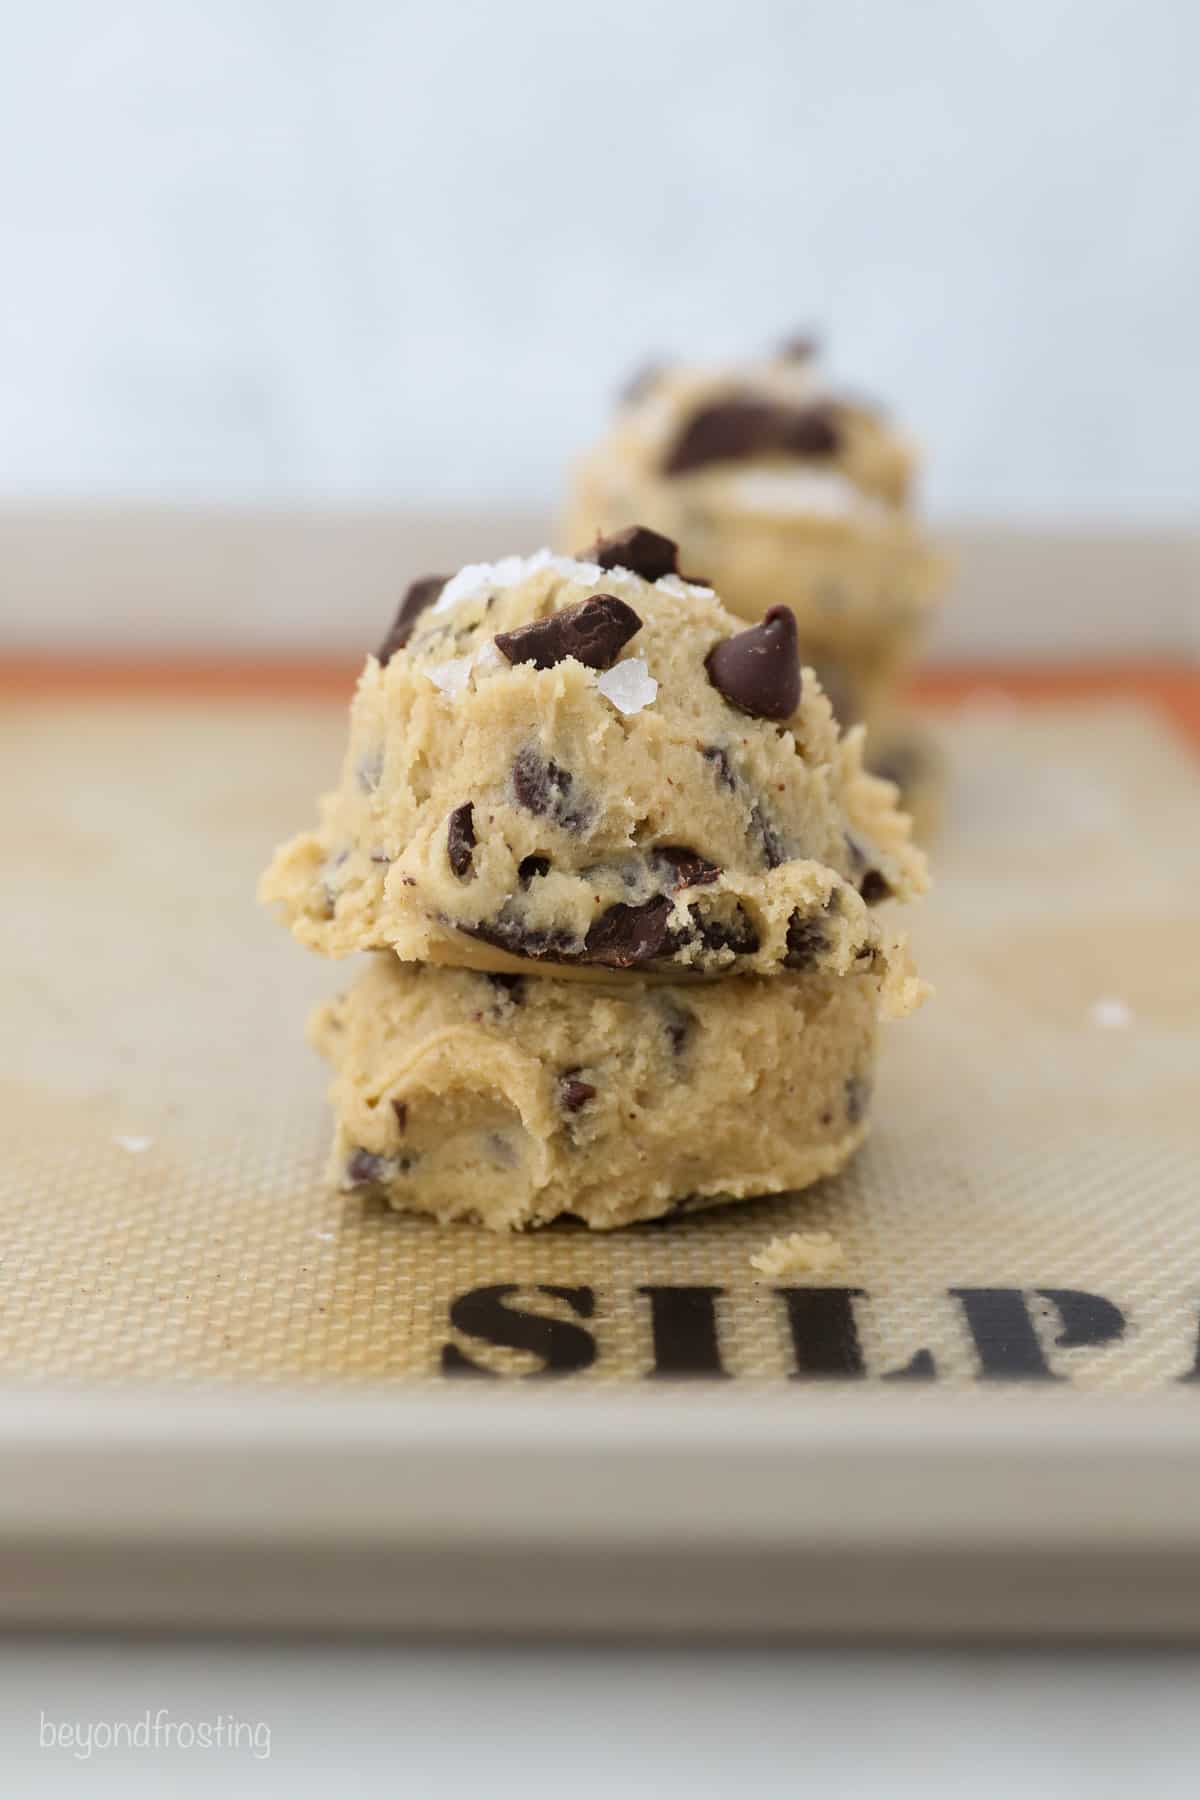 Two scoops of cookie dough on top of one another on a silpat lined baking sheet.